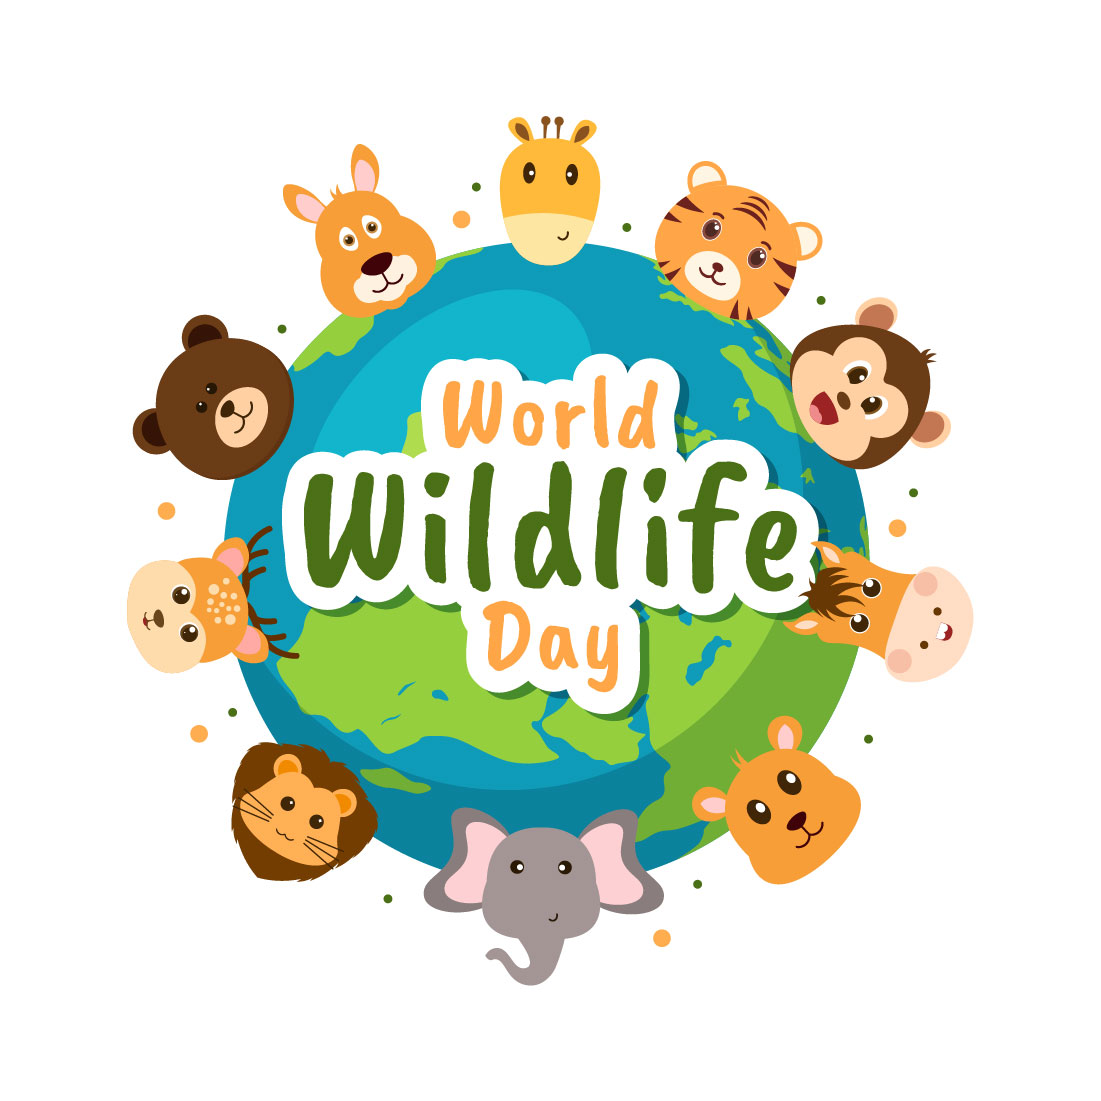 Wildlife Day Graphics Design cover image.